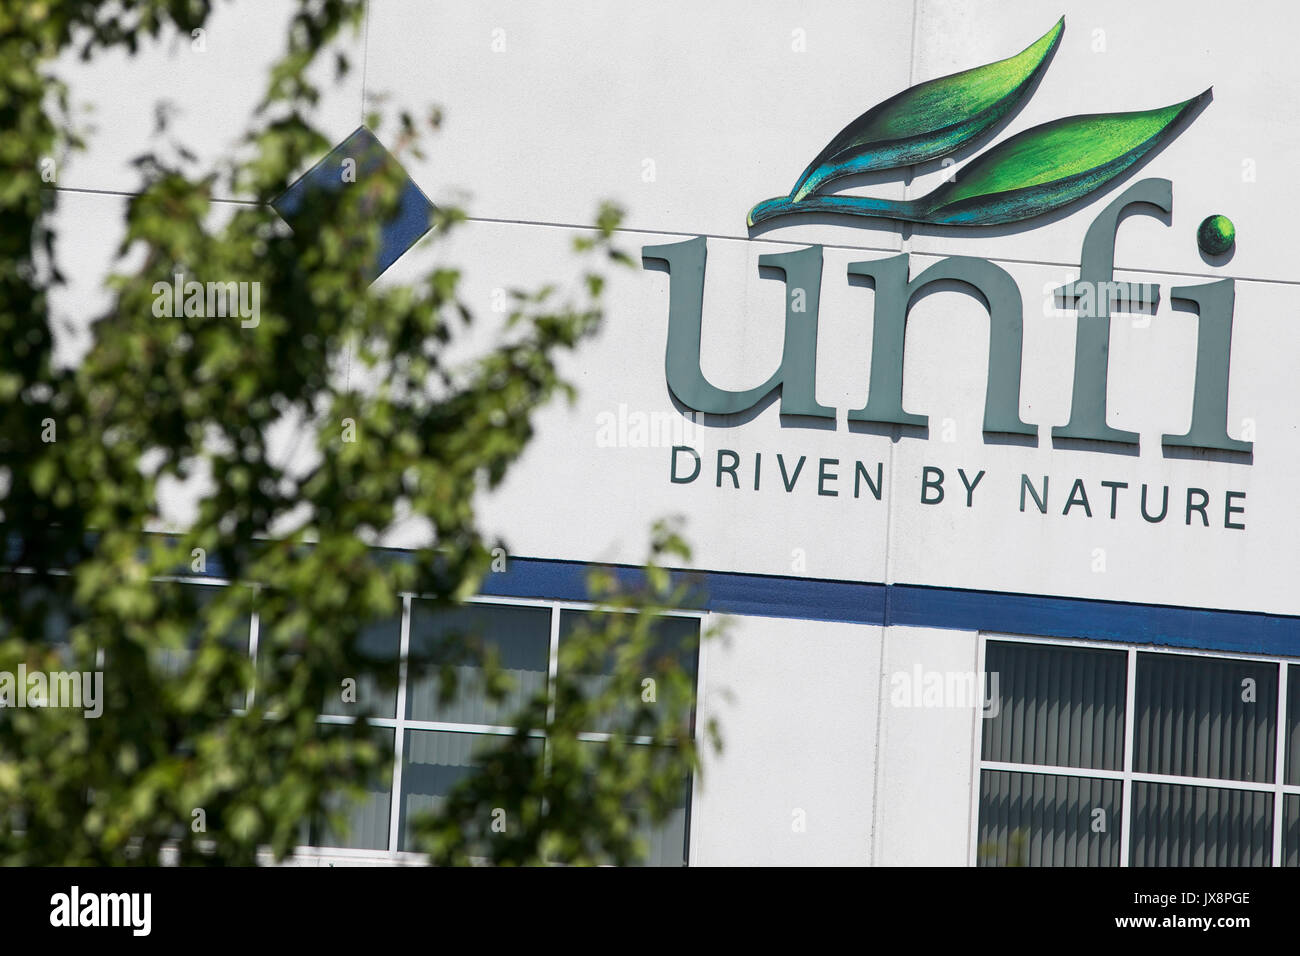 A logo sign outside of a facility occupied by United Natural Foods (UNFI) in York, Pennsylvania on July 30, 2017. Stock Photo